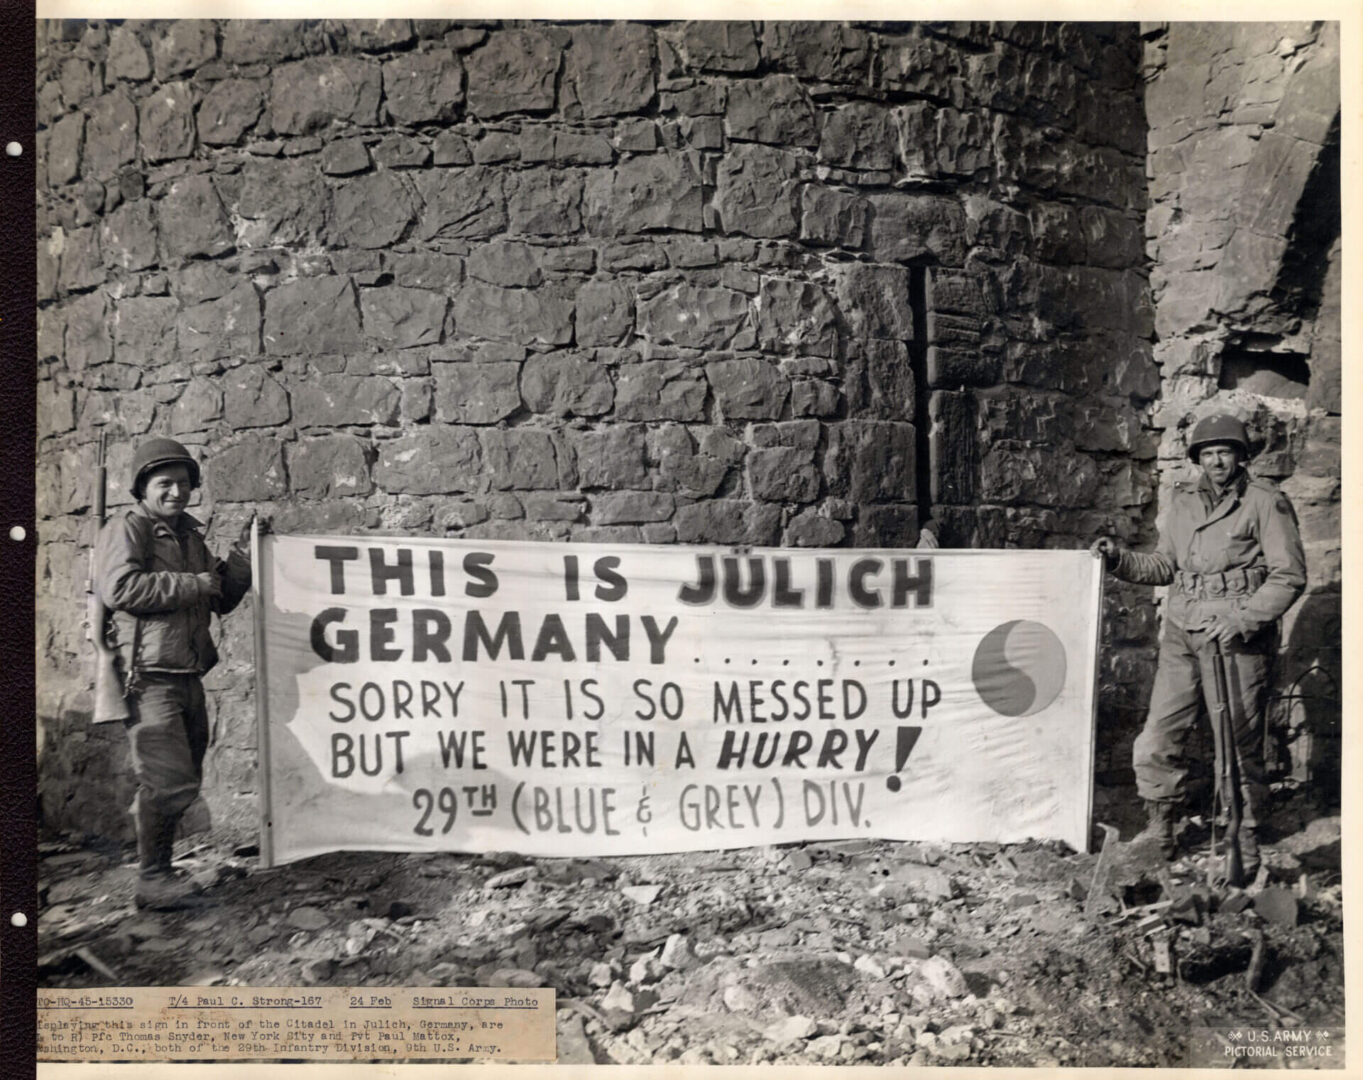 Two soldiers holding up a banner